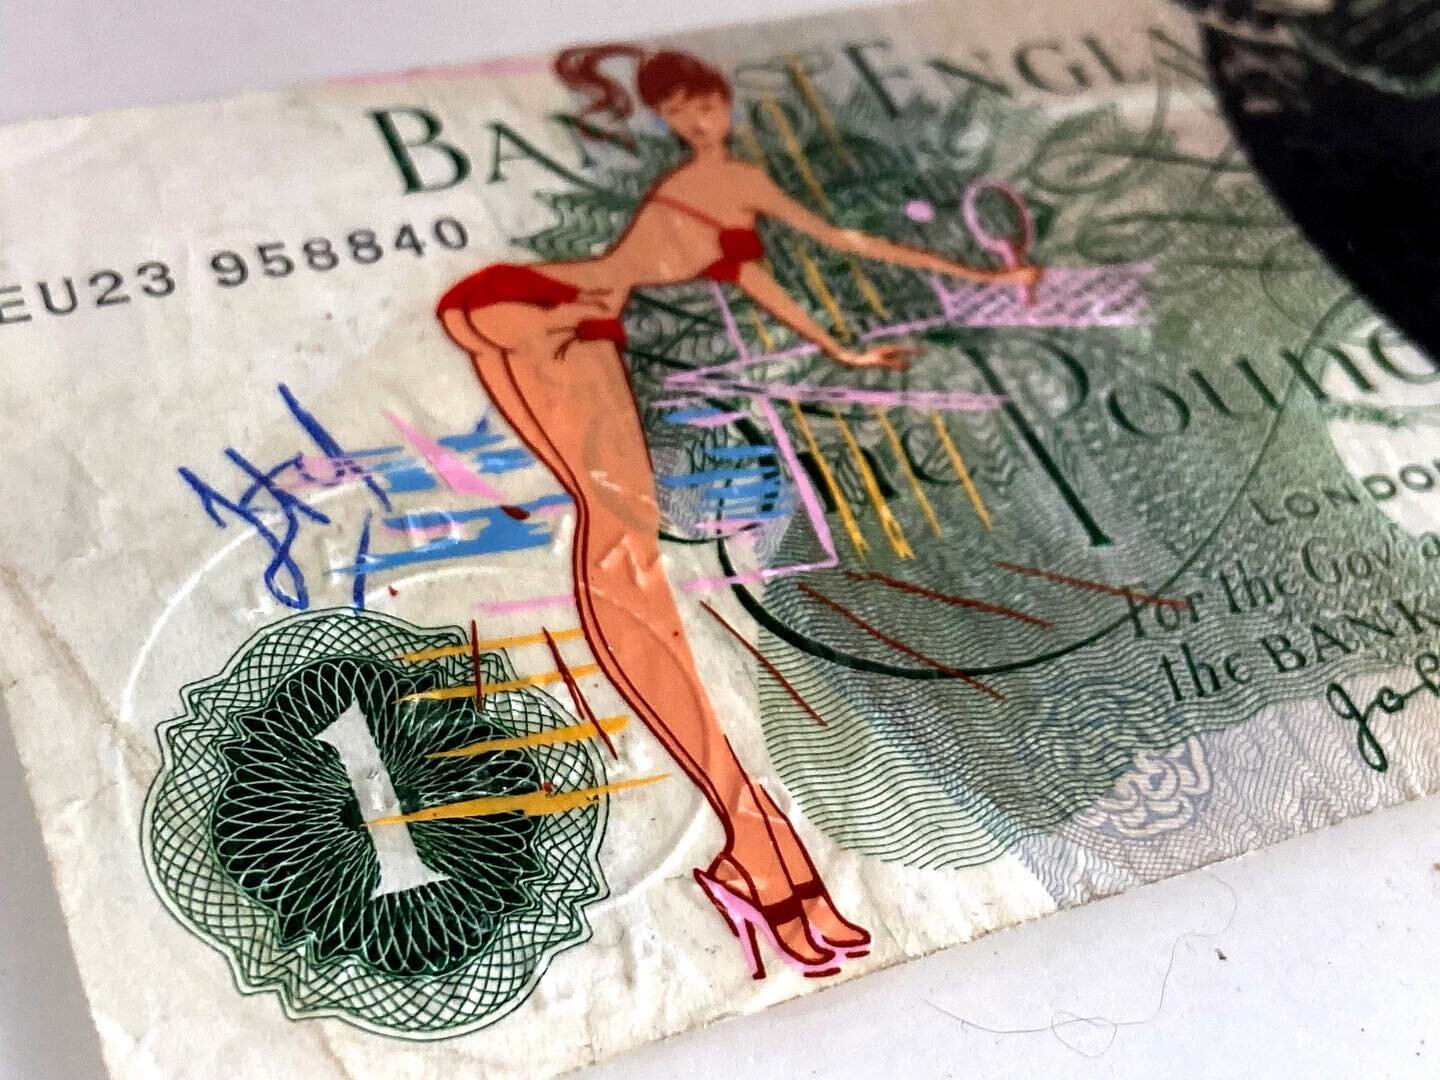 It&rsquo;s a #rudesummer over at @art_car_boot_fair !!! One month special shop with summer time related art work for sale. I have just 3 #upcycled banknotes !! Two #madinengland and 1 #madinmargate . They are the very last few vintage 1960&rsquo;s pi